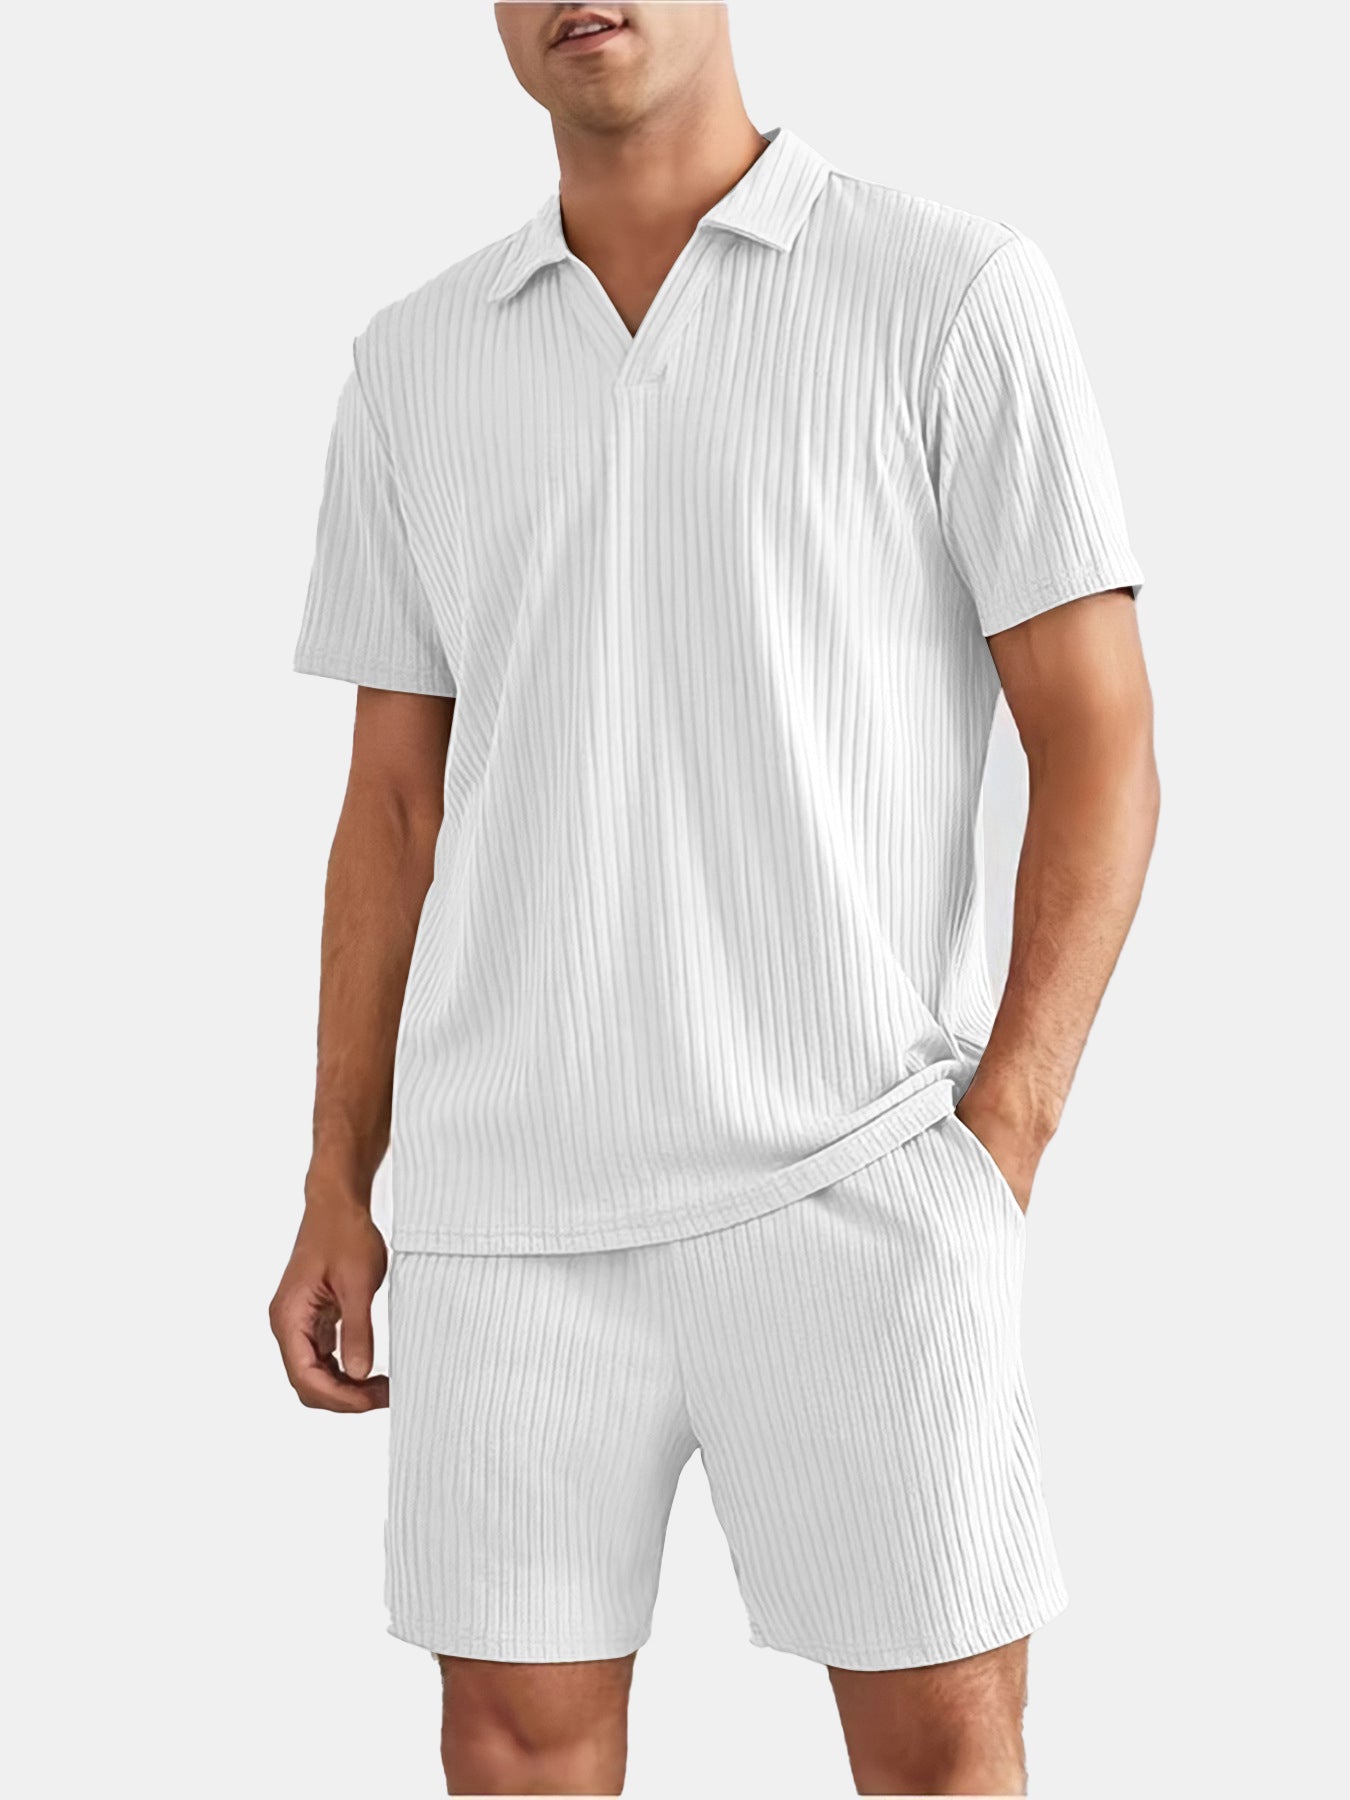 Men's Solid Color Loose Striped Short-sleeved Shorts Polo Suit